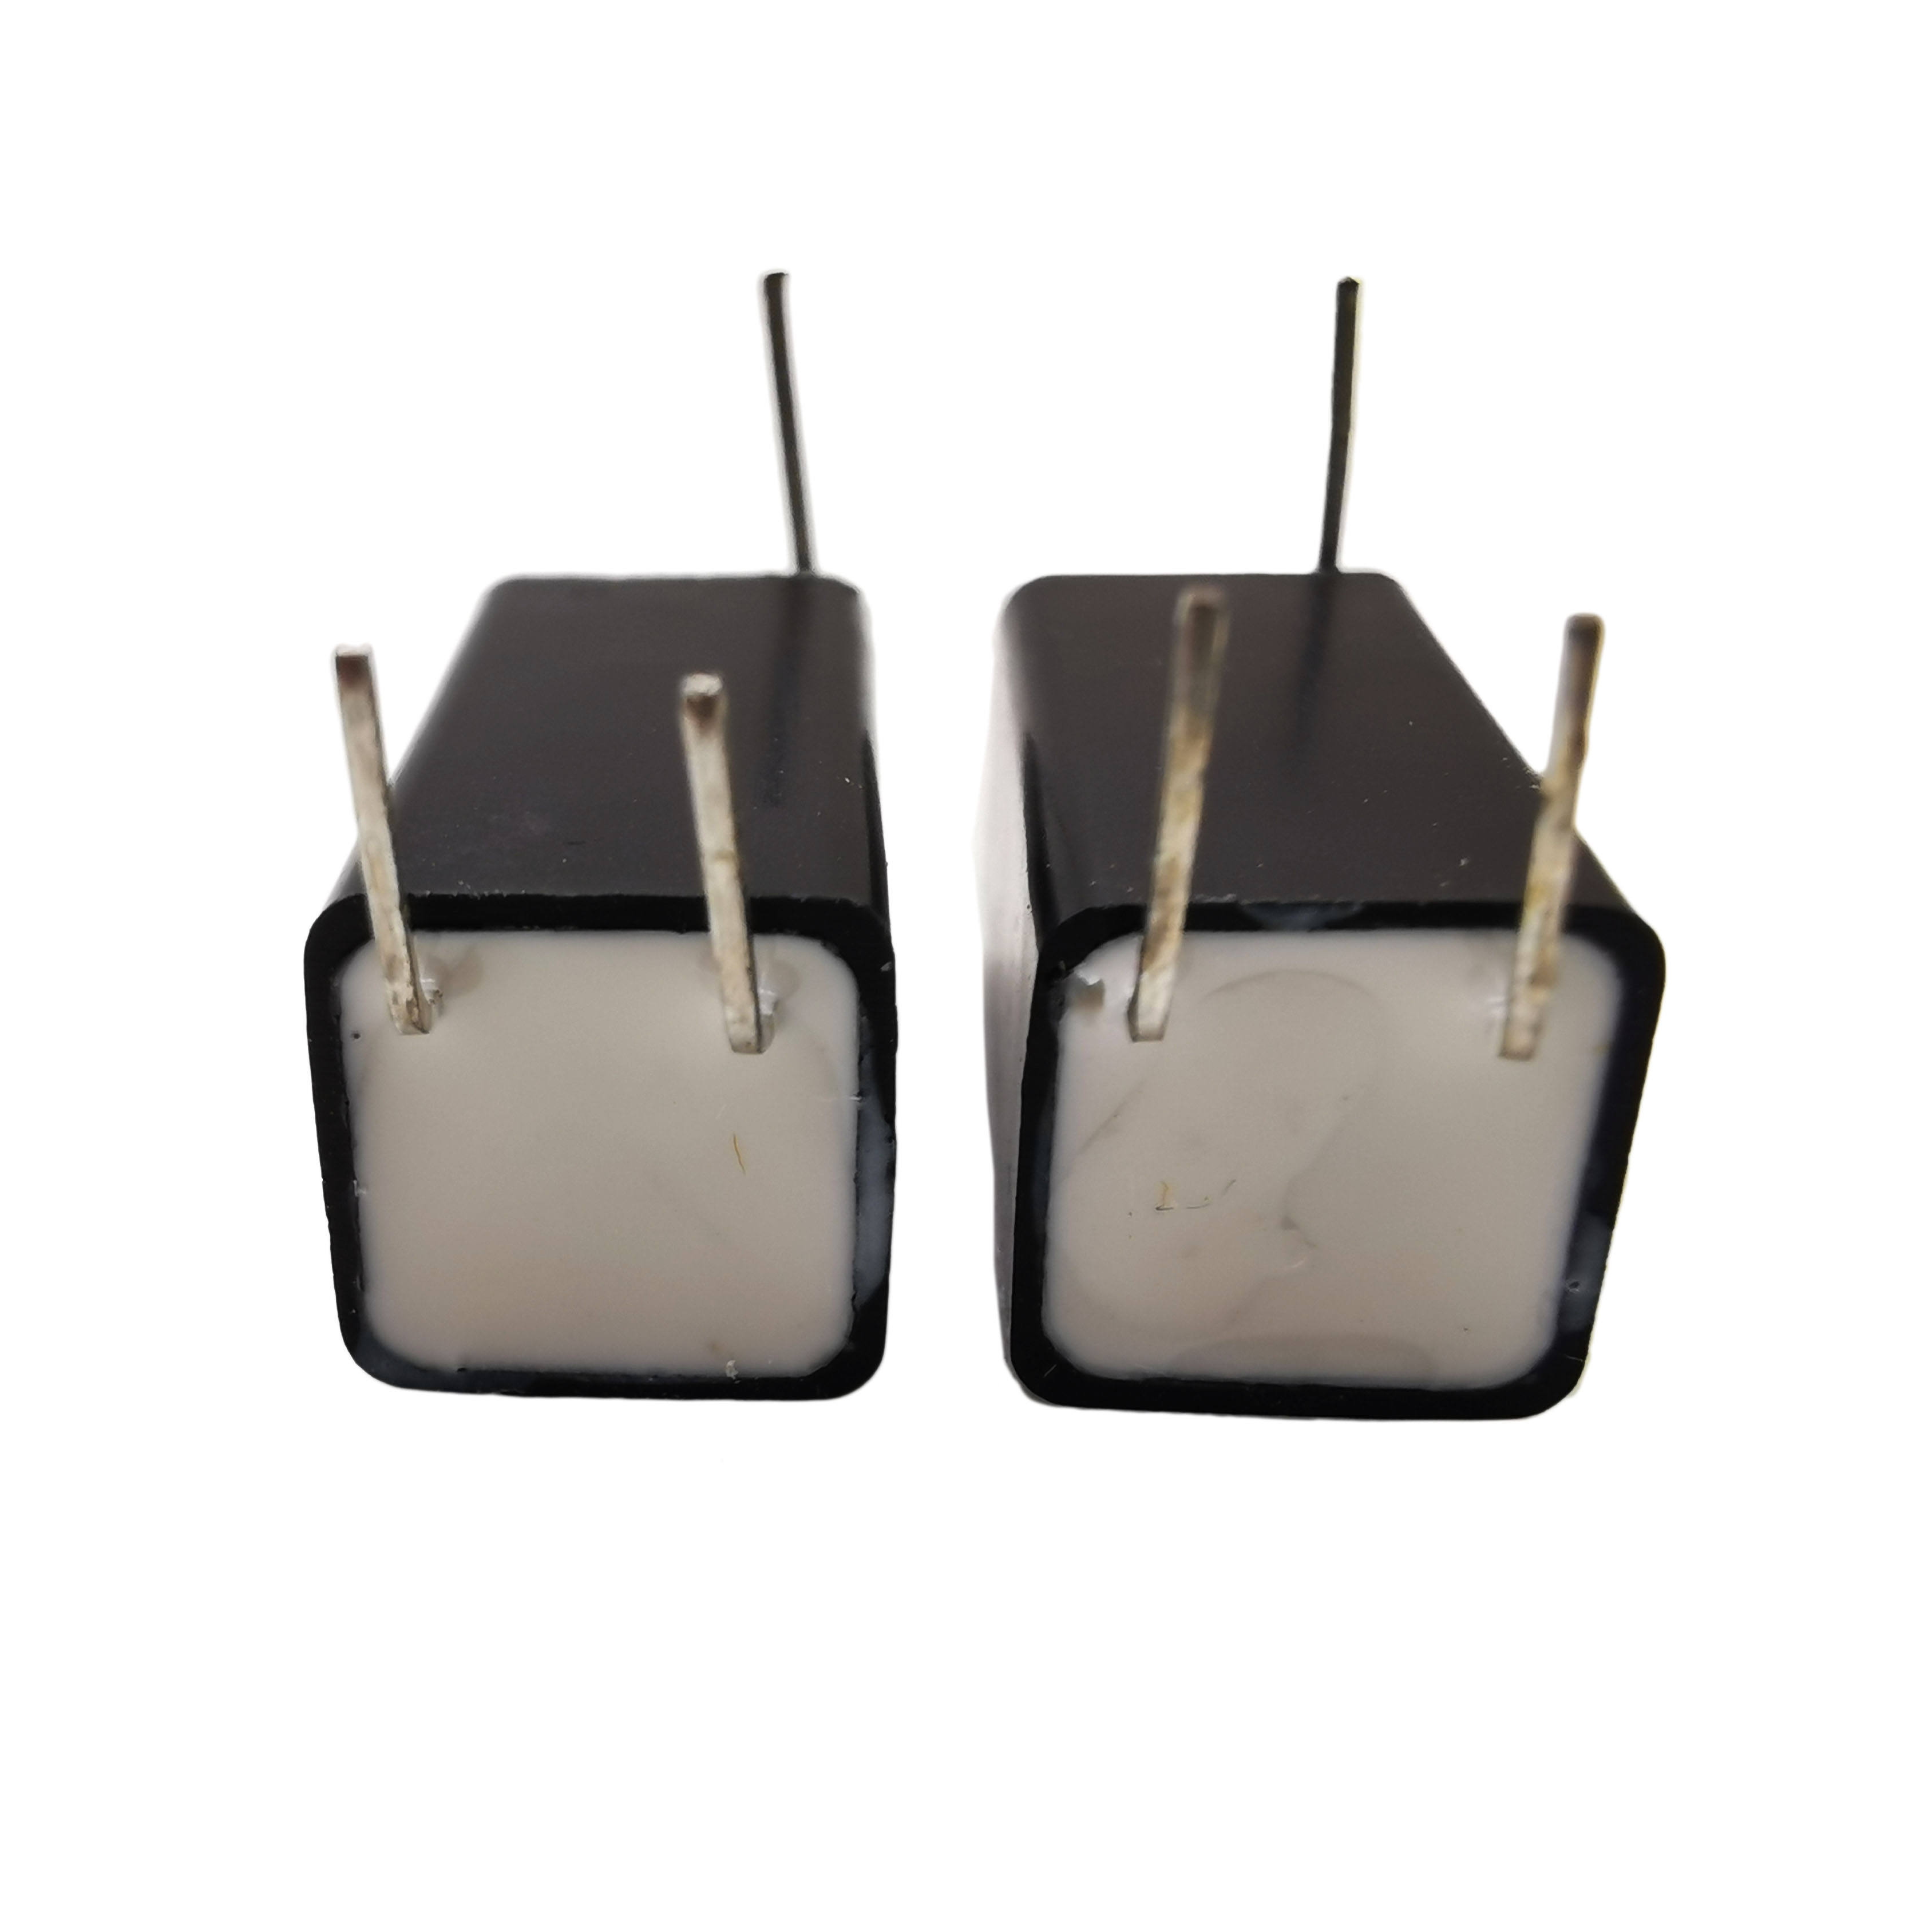 PCB Mount Flash-tube Trigger Transformer with 7 to 10kV Output